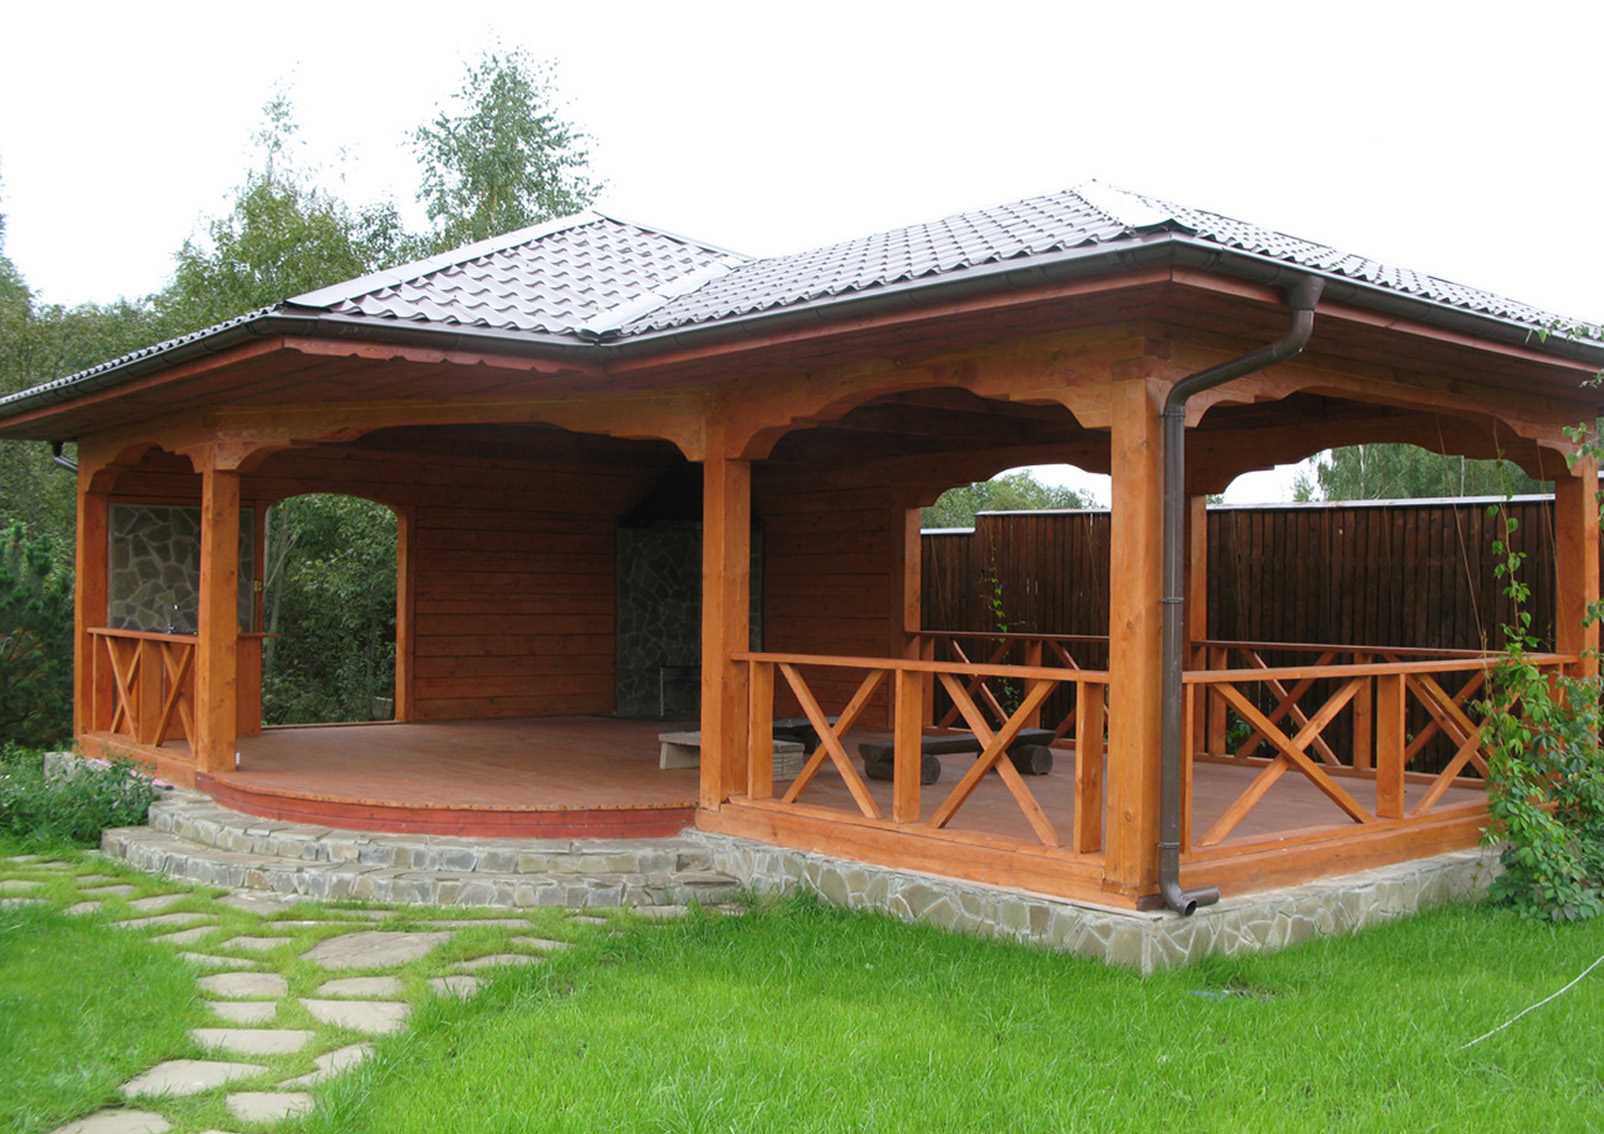 version of the unusual style of the gazebo